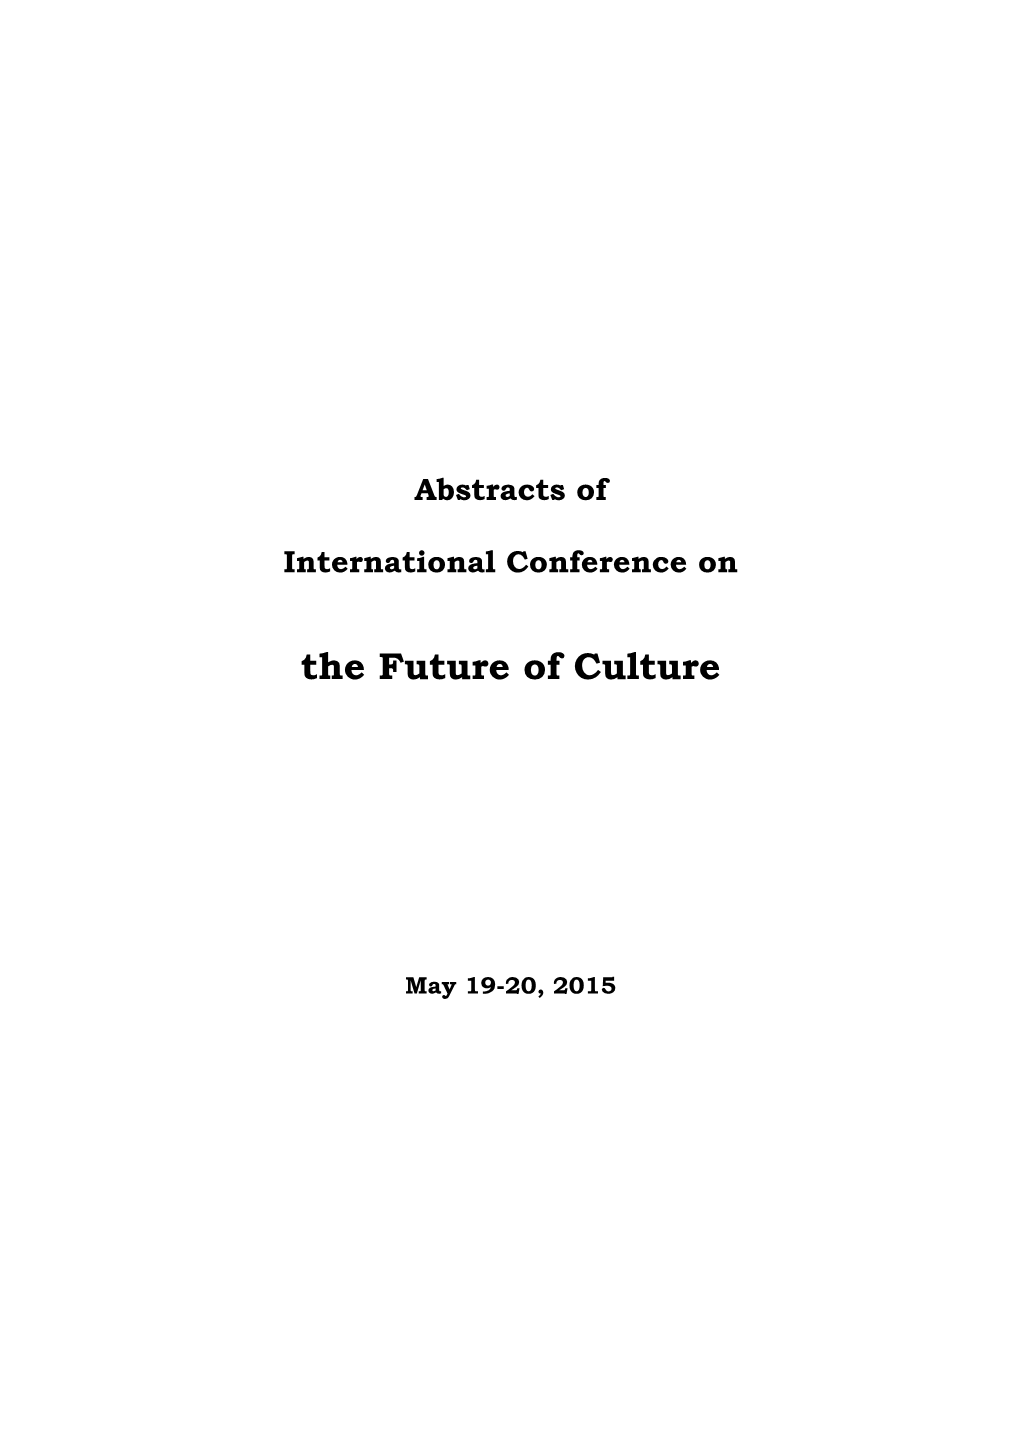 Abstracts of International Conference on the Future of Culture